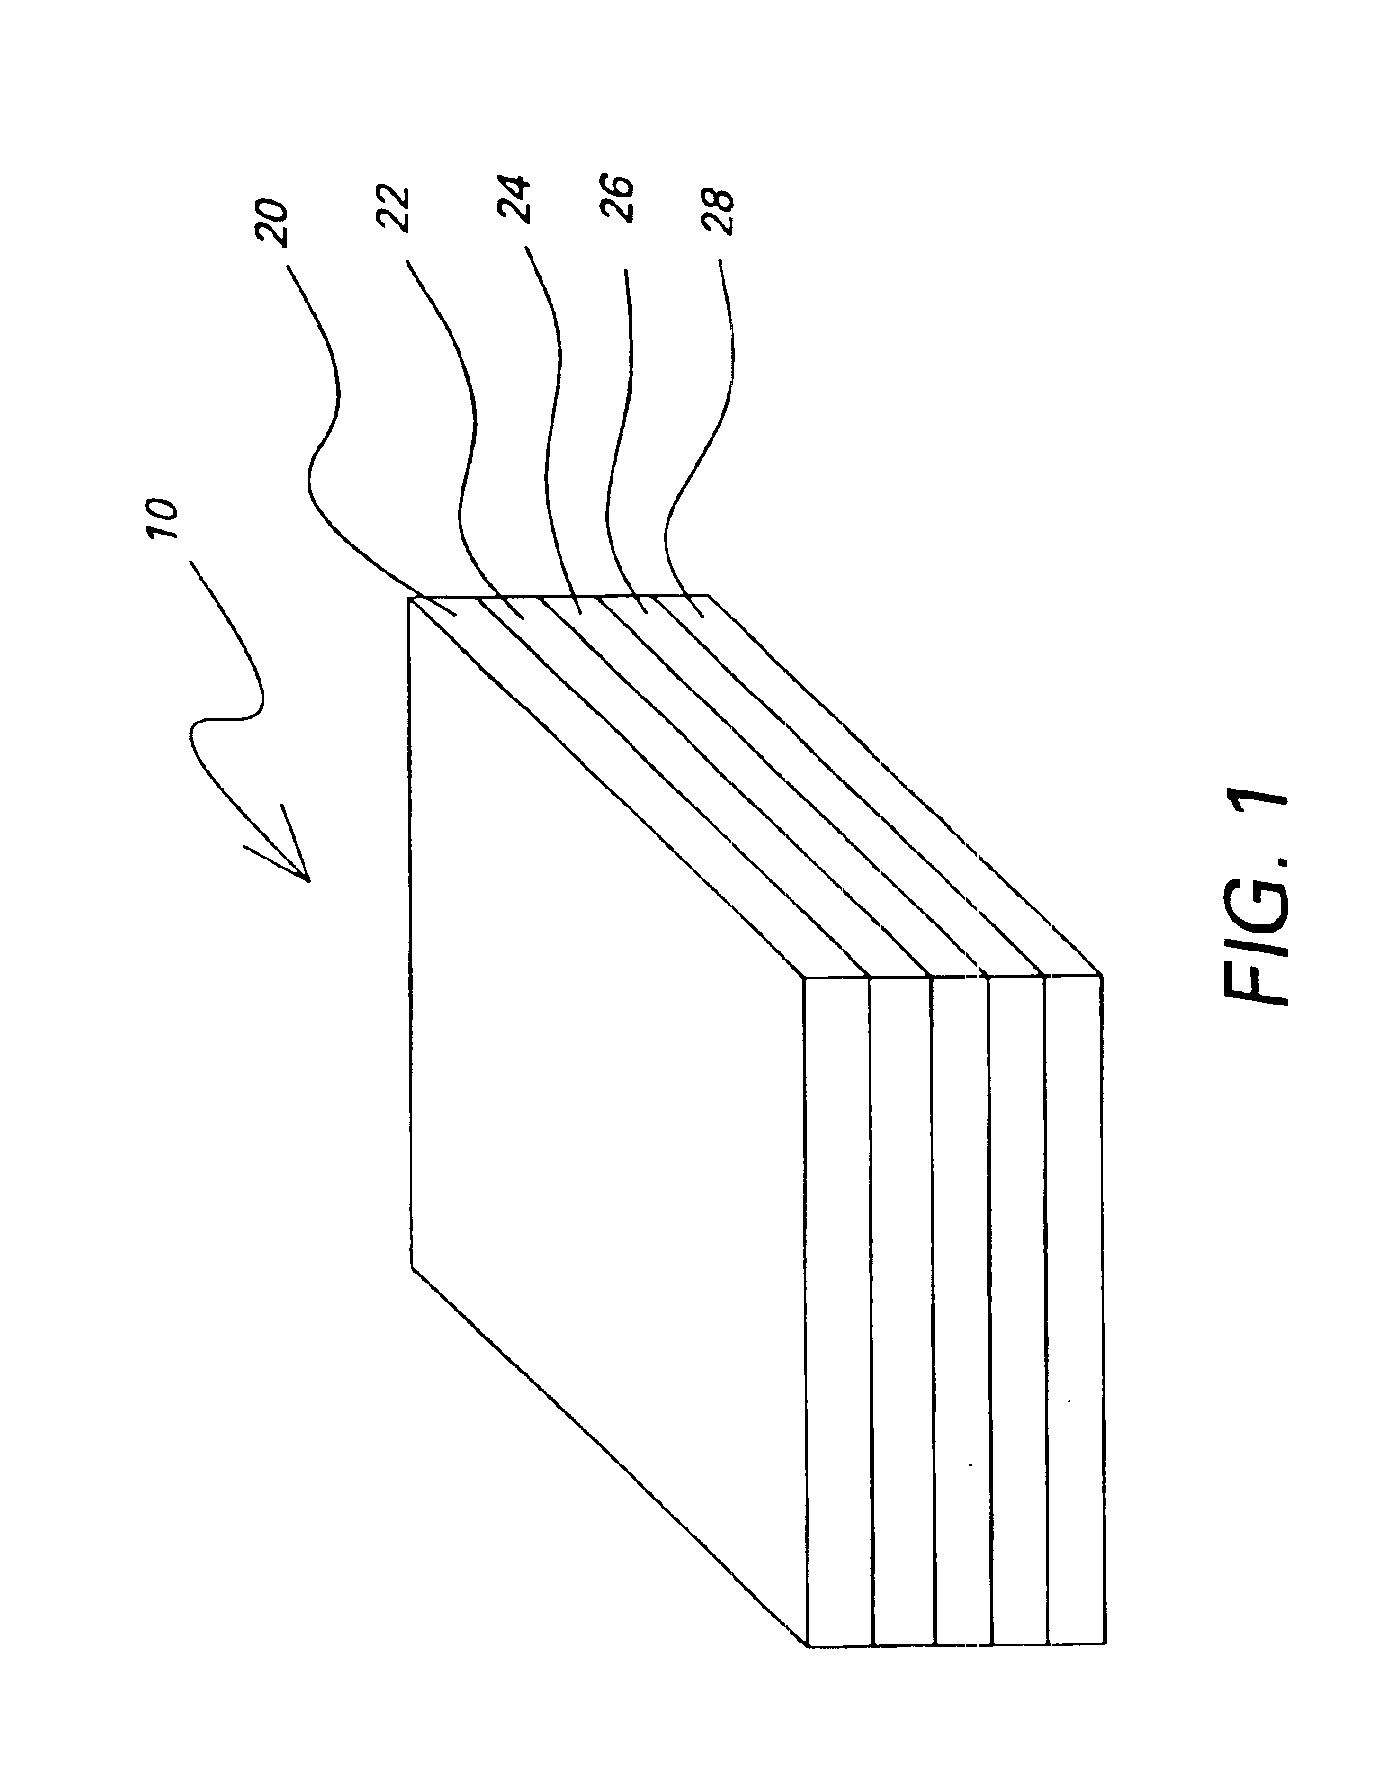 Matching layer having gradient in impedance for ultrasound transducers